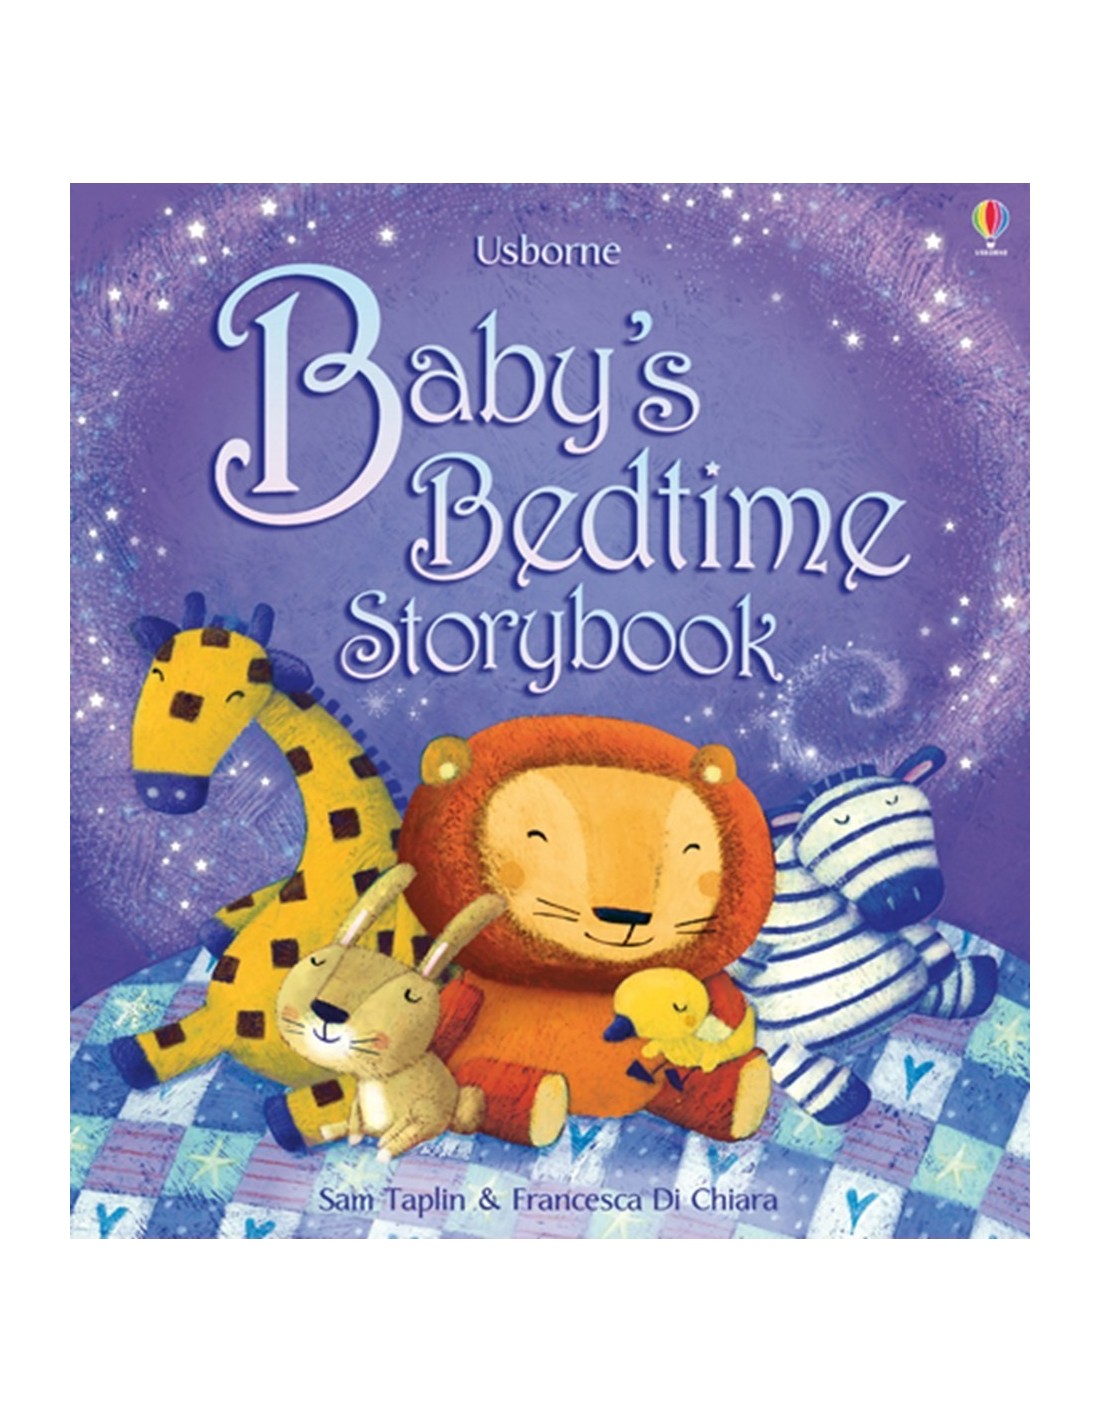 Baby's bedtime storybook